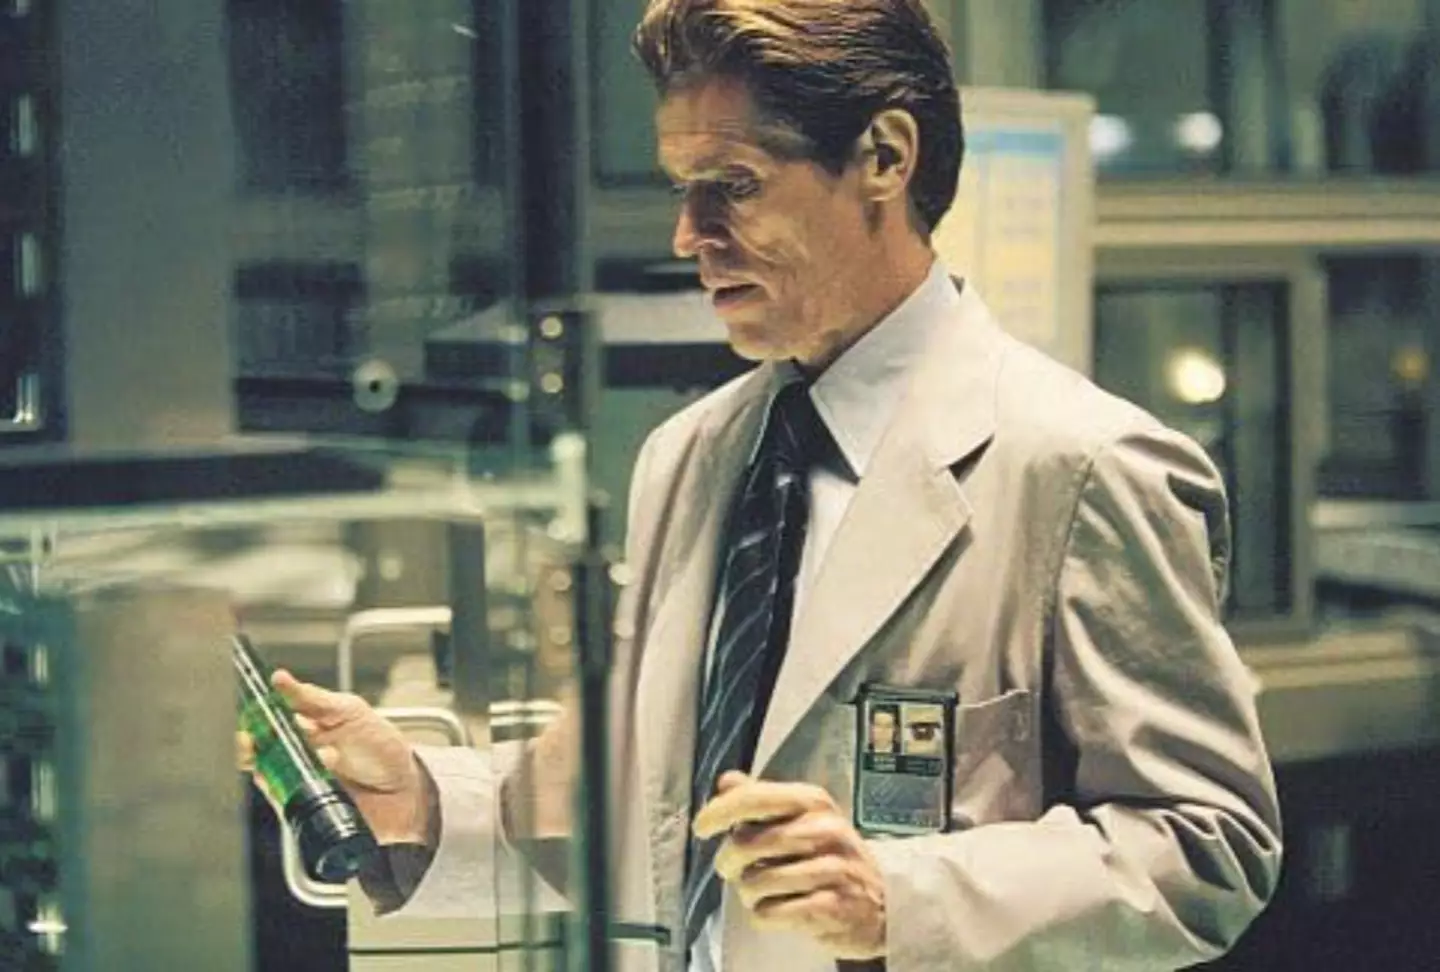 Dafoe is well-known for playing the Green Goblin in 2002's Spider-Man.